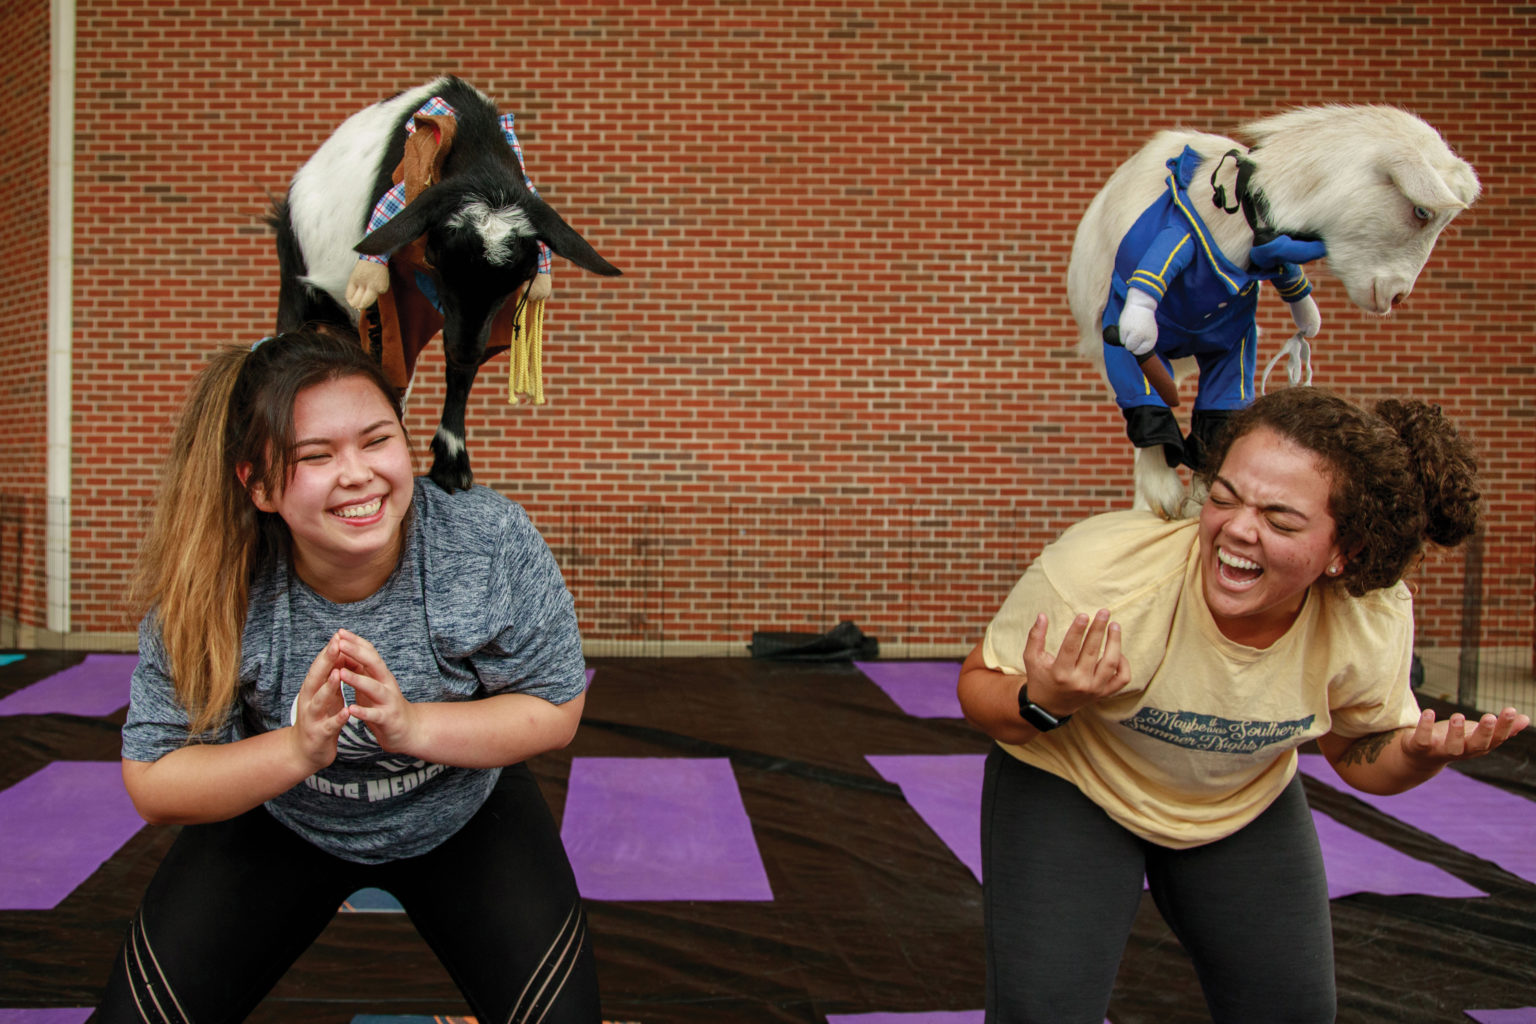 Two women in a yoga class laugh as small goats balance on their back and shoulders